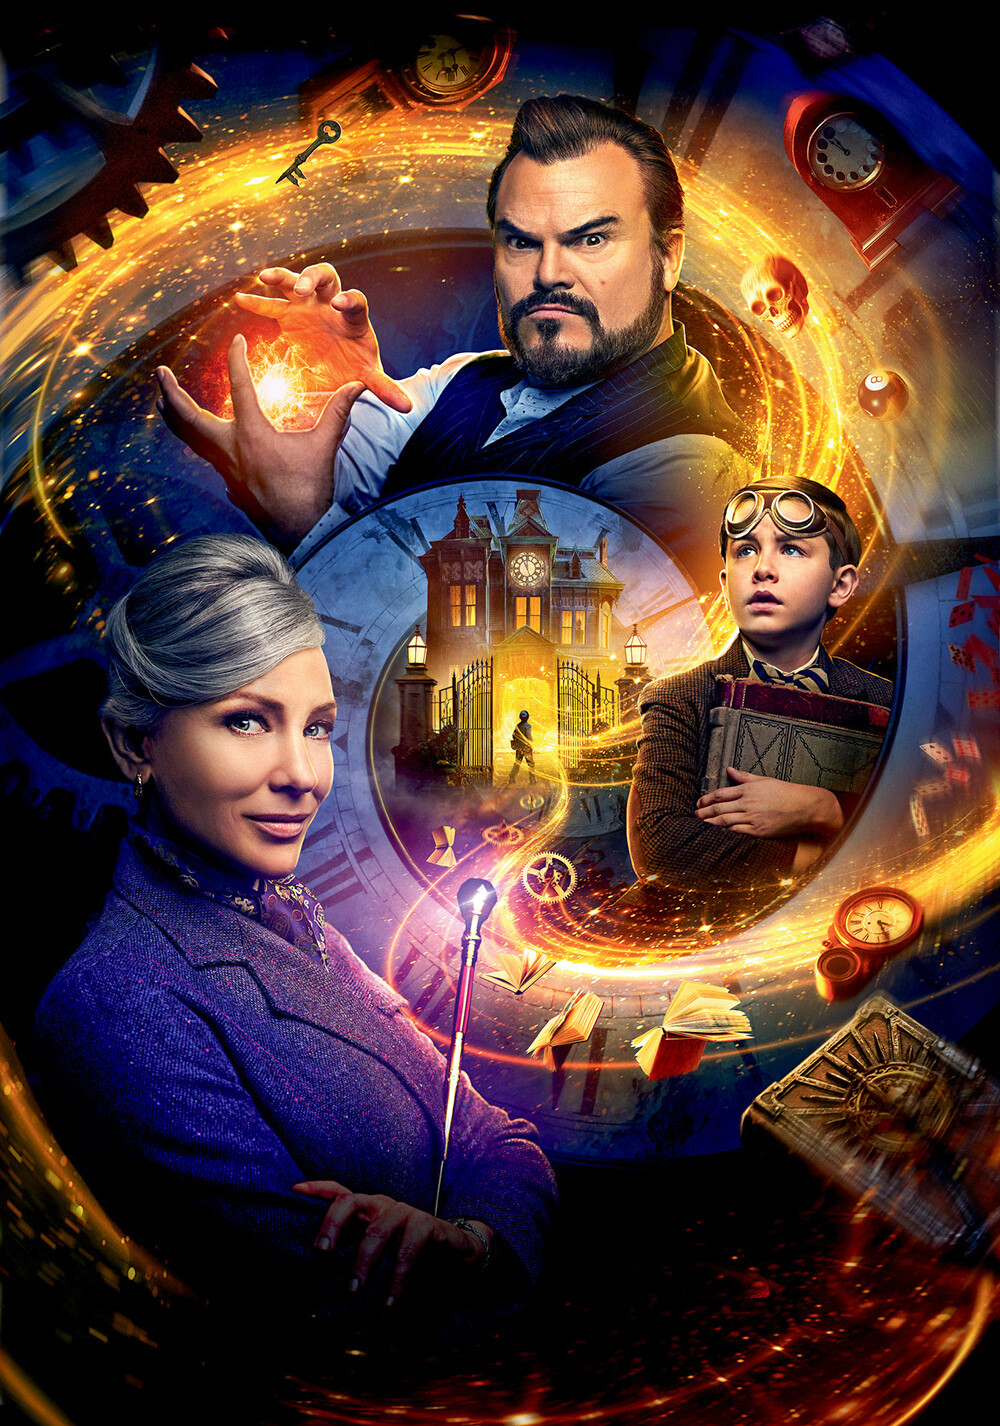 The House with a Clock in Its Walls 2018 2160p BluRay x265 10bit SDR DTS-HD MA TrueHD 7 1 Atmos-SWTYBLZ